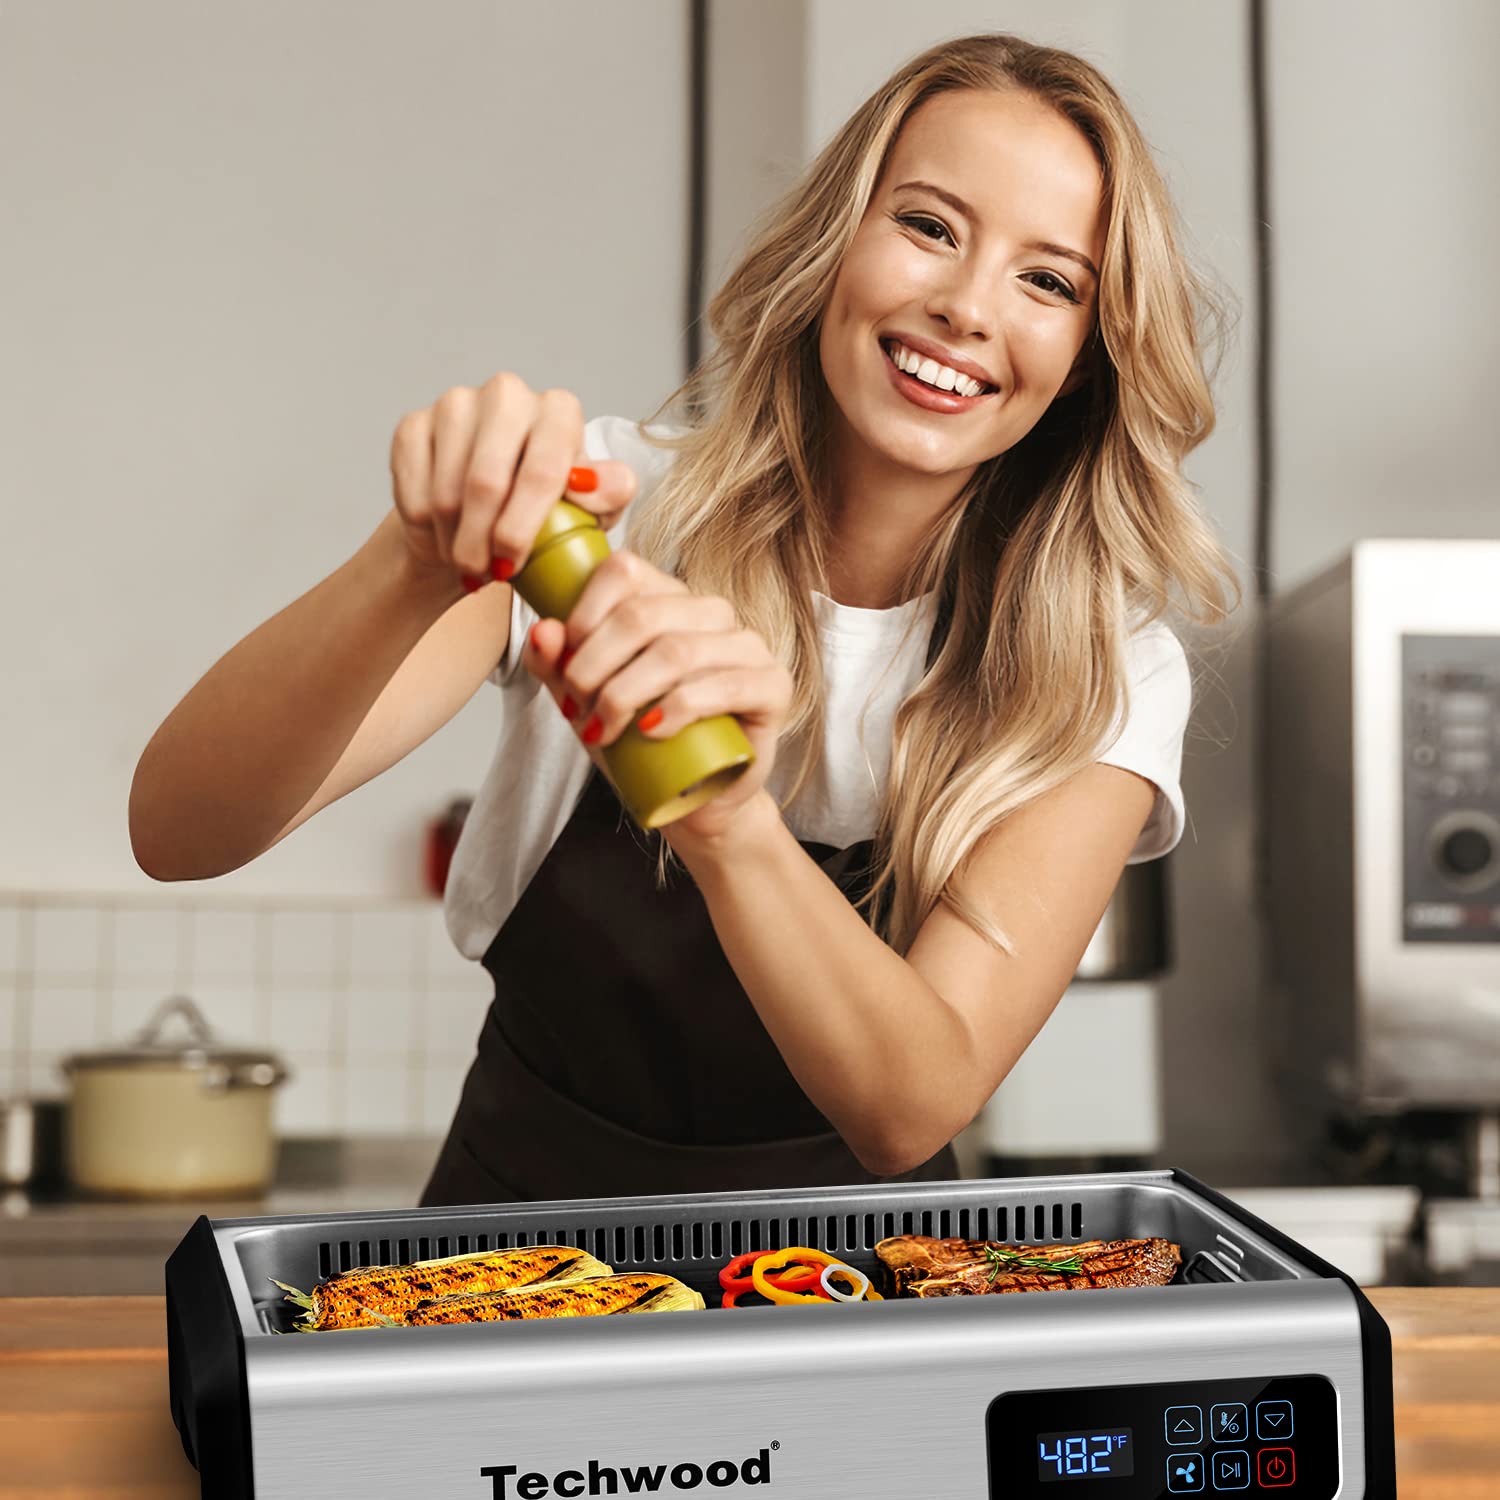  Smokeless Indoor Grill, Techwood 1500W Electric Grill Portable  Korean Grill Non-Stick Grill Plates with Temperature Control, Removable  Drip Tray, Tempered Glass Lid, Dishwasher-Safe: Home & Kitchen